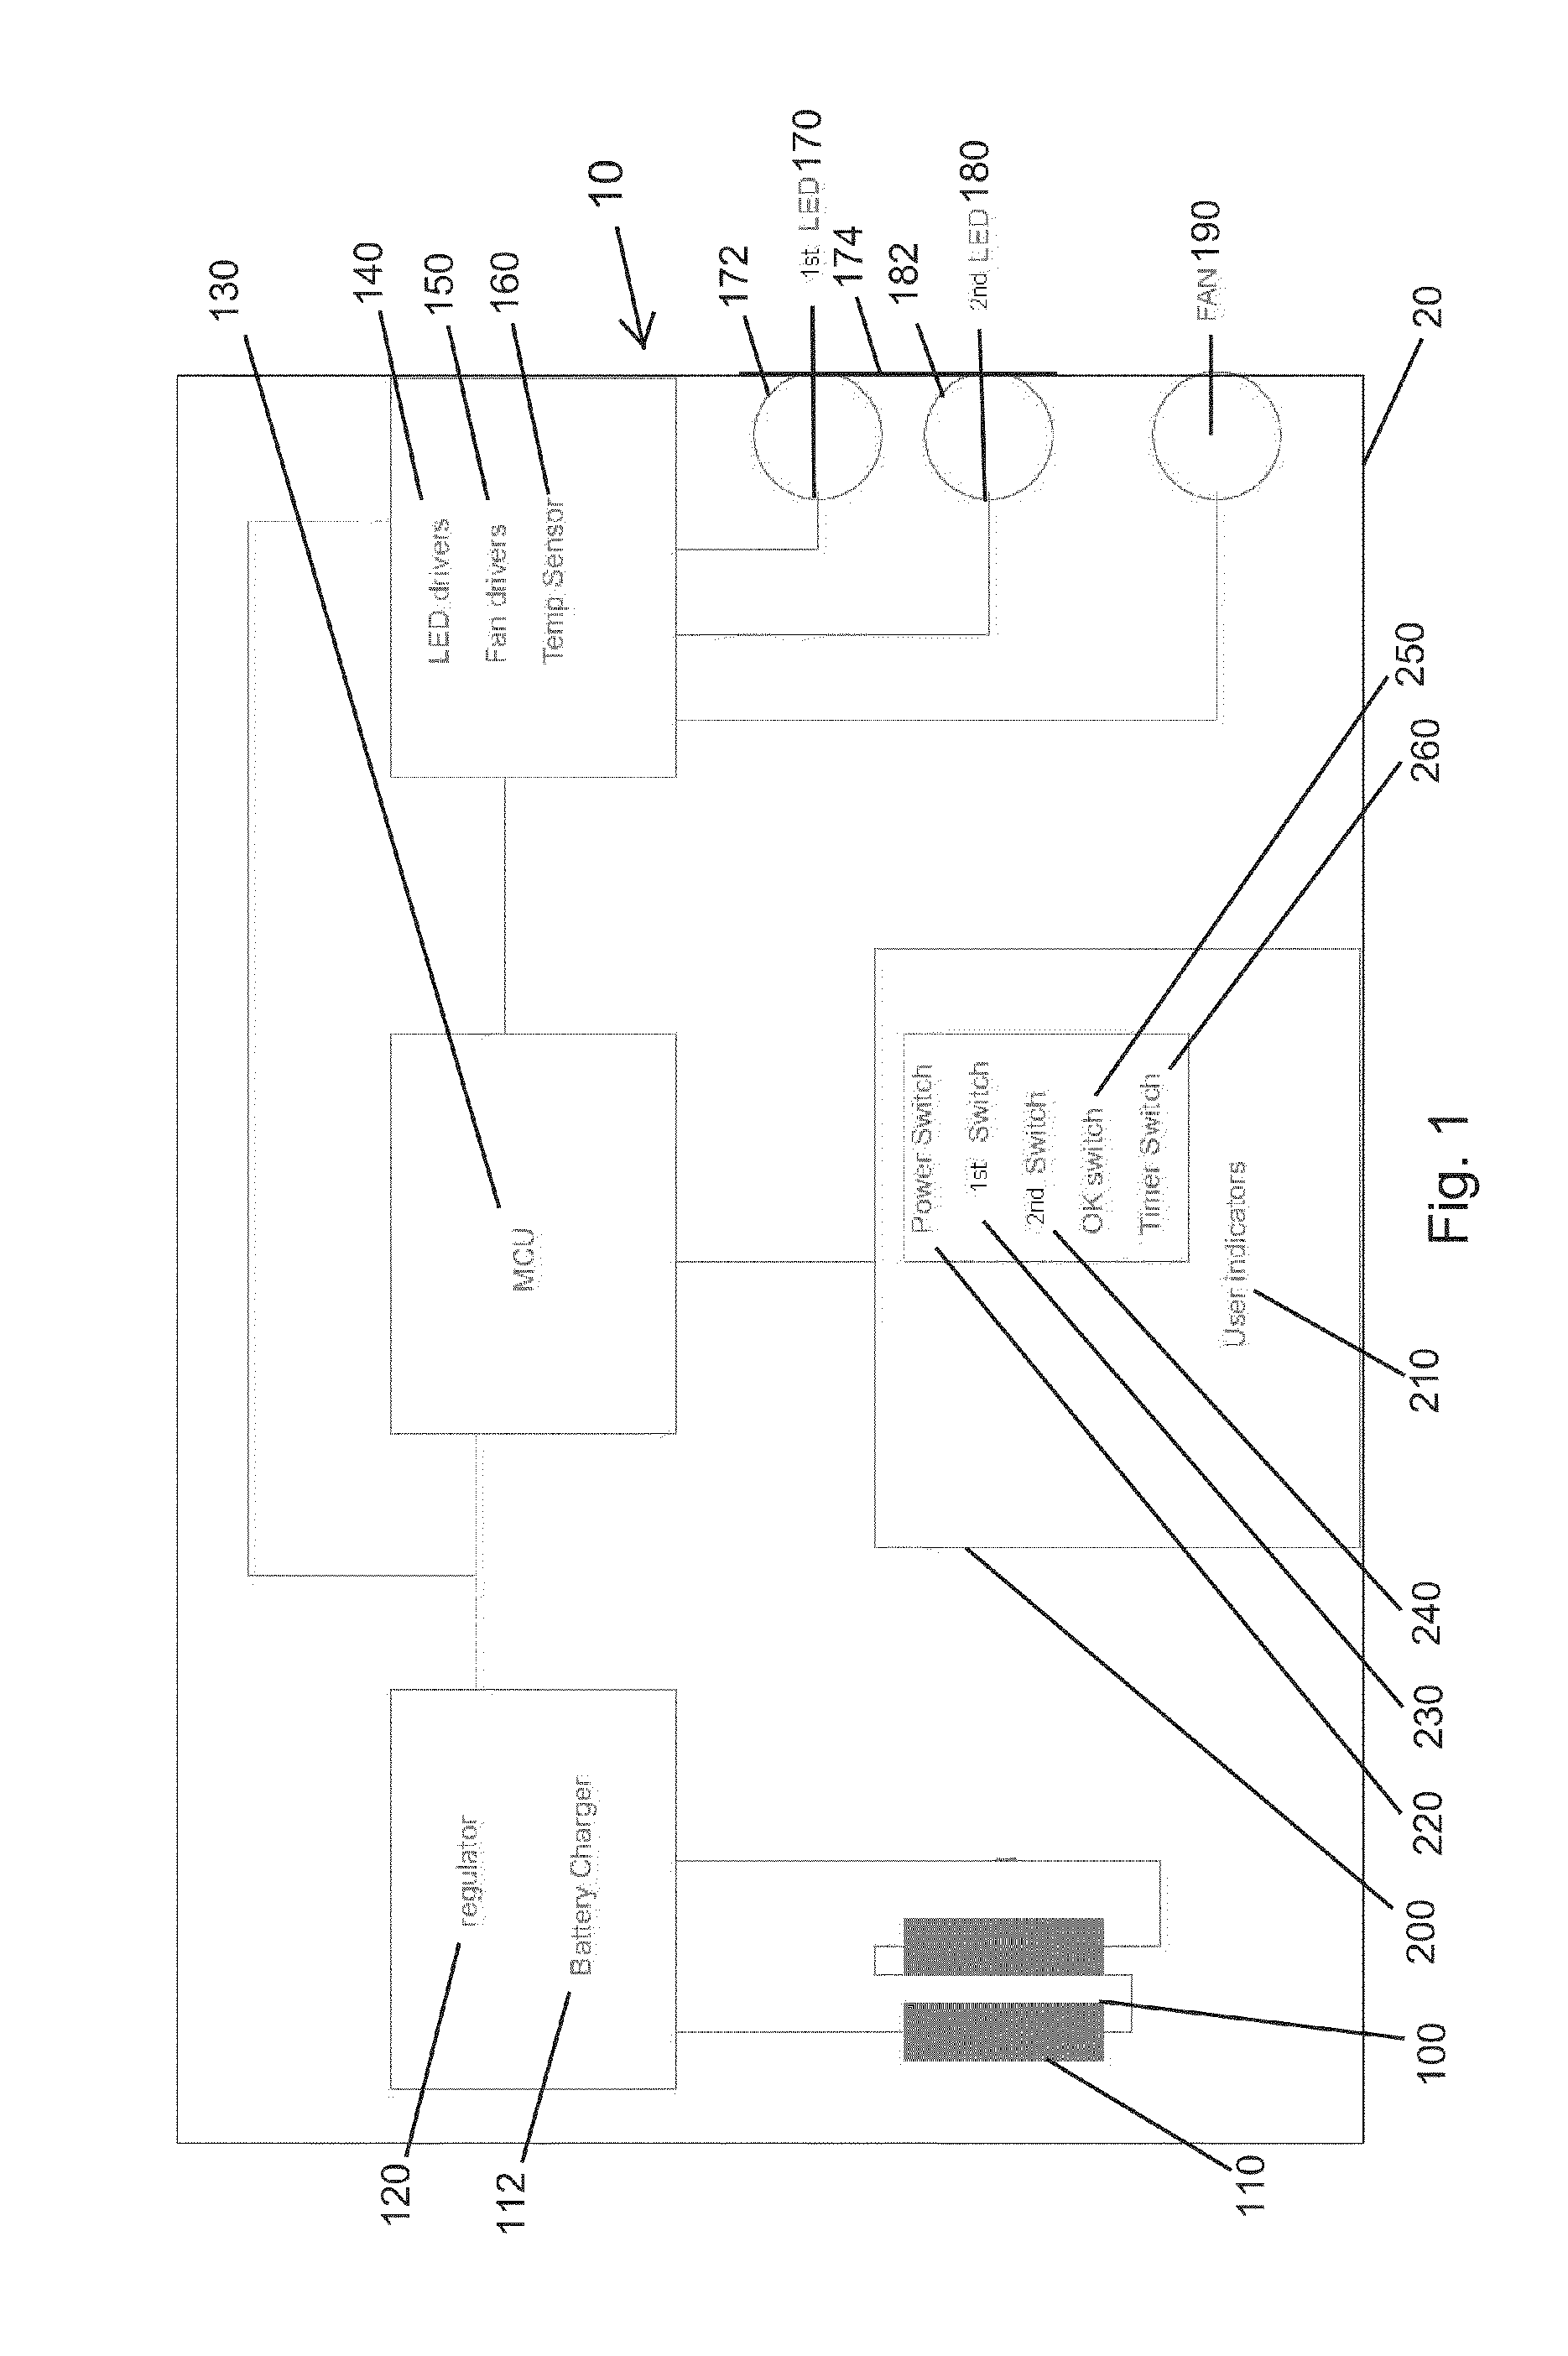 High powered light emitting diode photobiology compositions, methods and systems